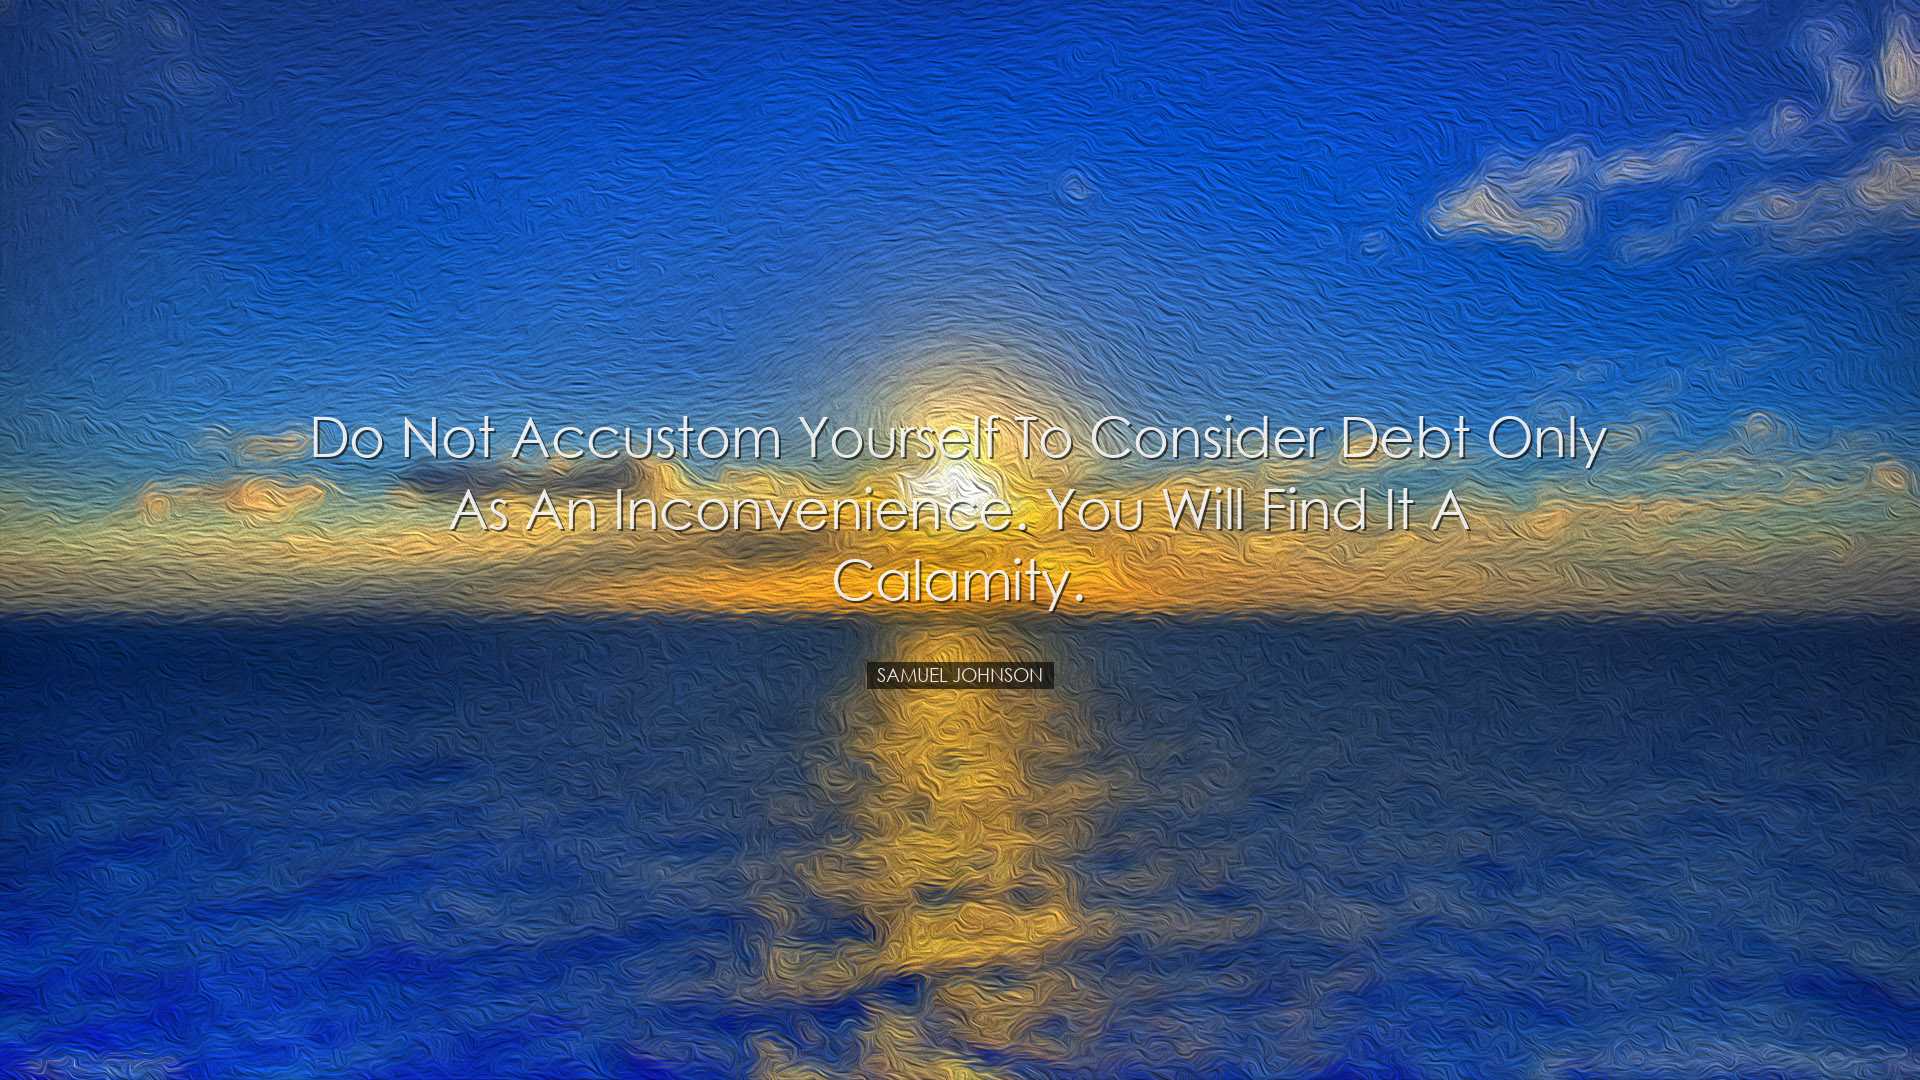 Do not accustom yourself to consider debt only as an inconvenience